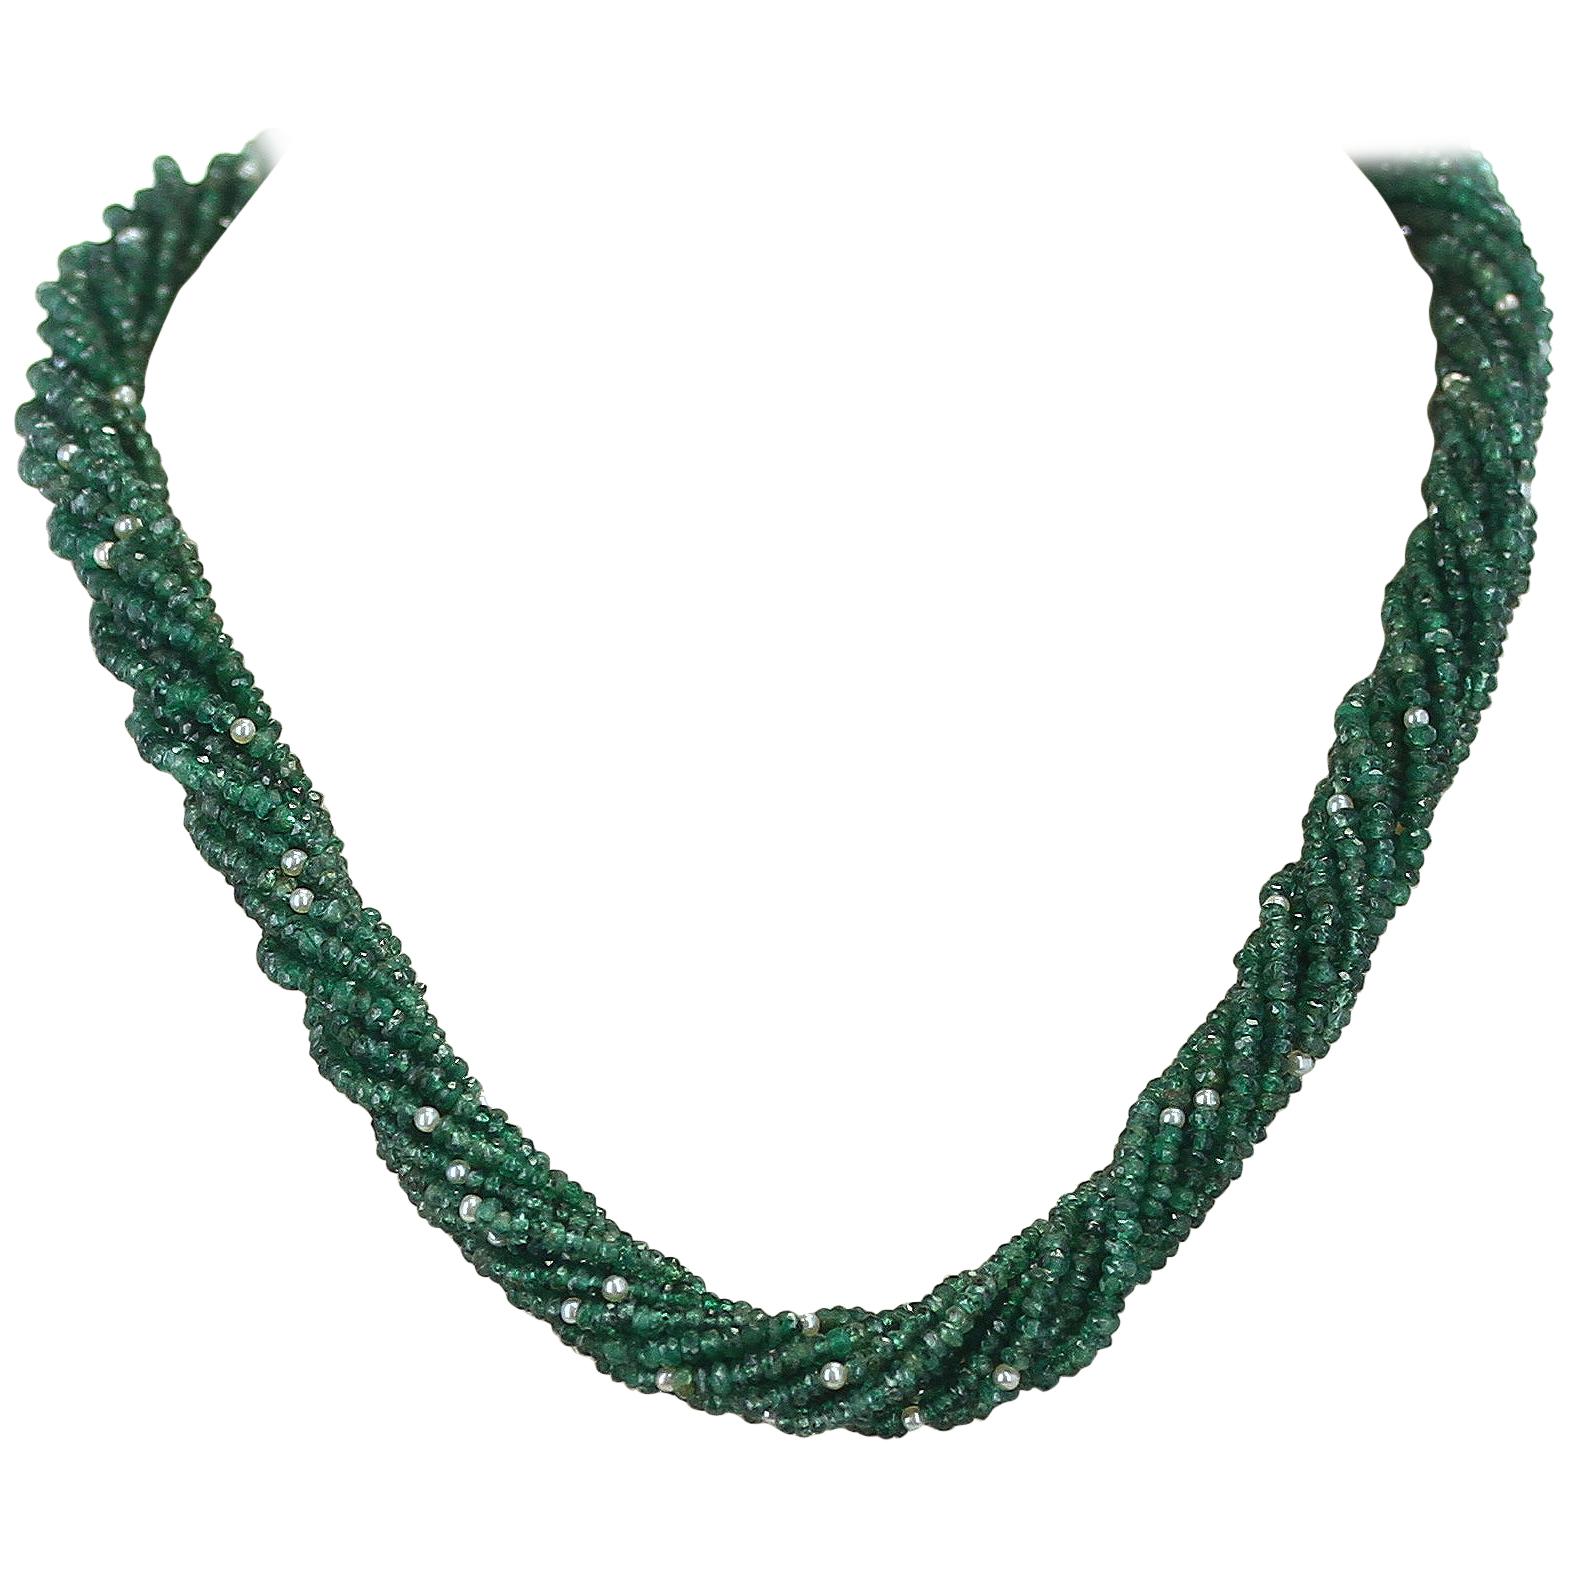 Genuine & Natural Faceted Green Emerald Beads with Pearls Choker Necklace, 18K 